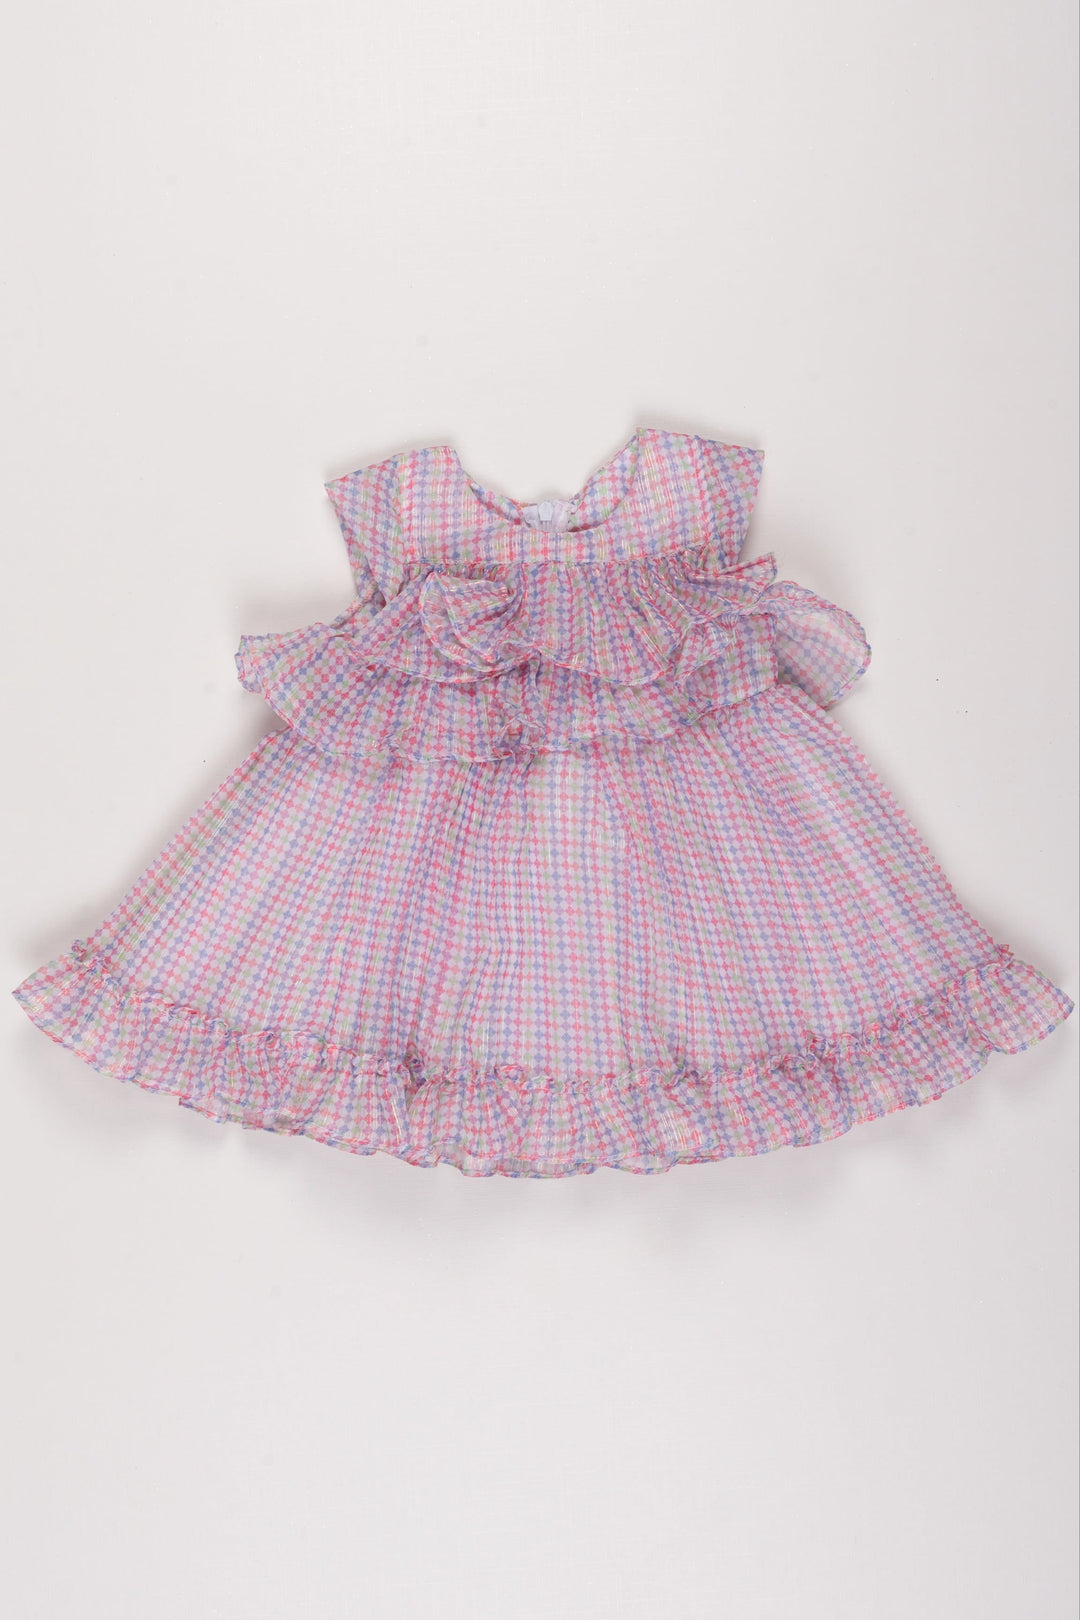 The Nesavu Baby Fancy Frock Infant Girl's Pastel Gingham Tiered Ruffle Frock - Perfect for Casual Summer Days Nesavu 12 (3M) / multicolor BFJ502A-12 Pastel Gingham Ruffle Frock for Infants | Spring-Summer Casual Dress | The Nesavu